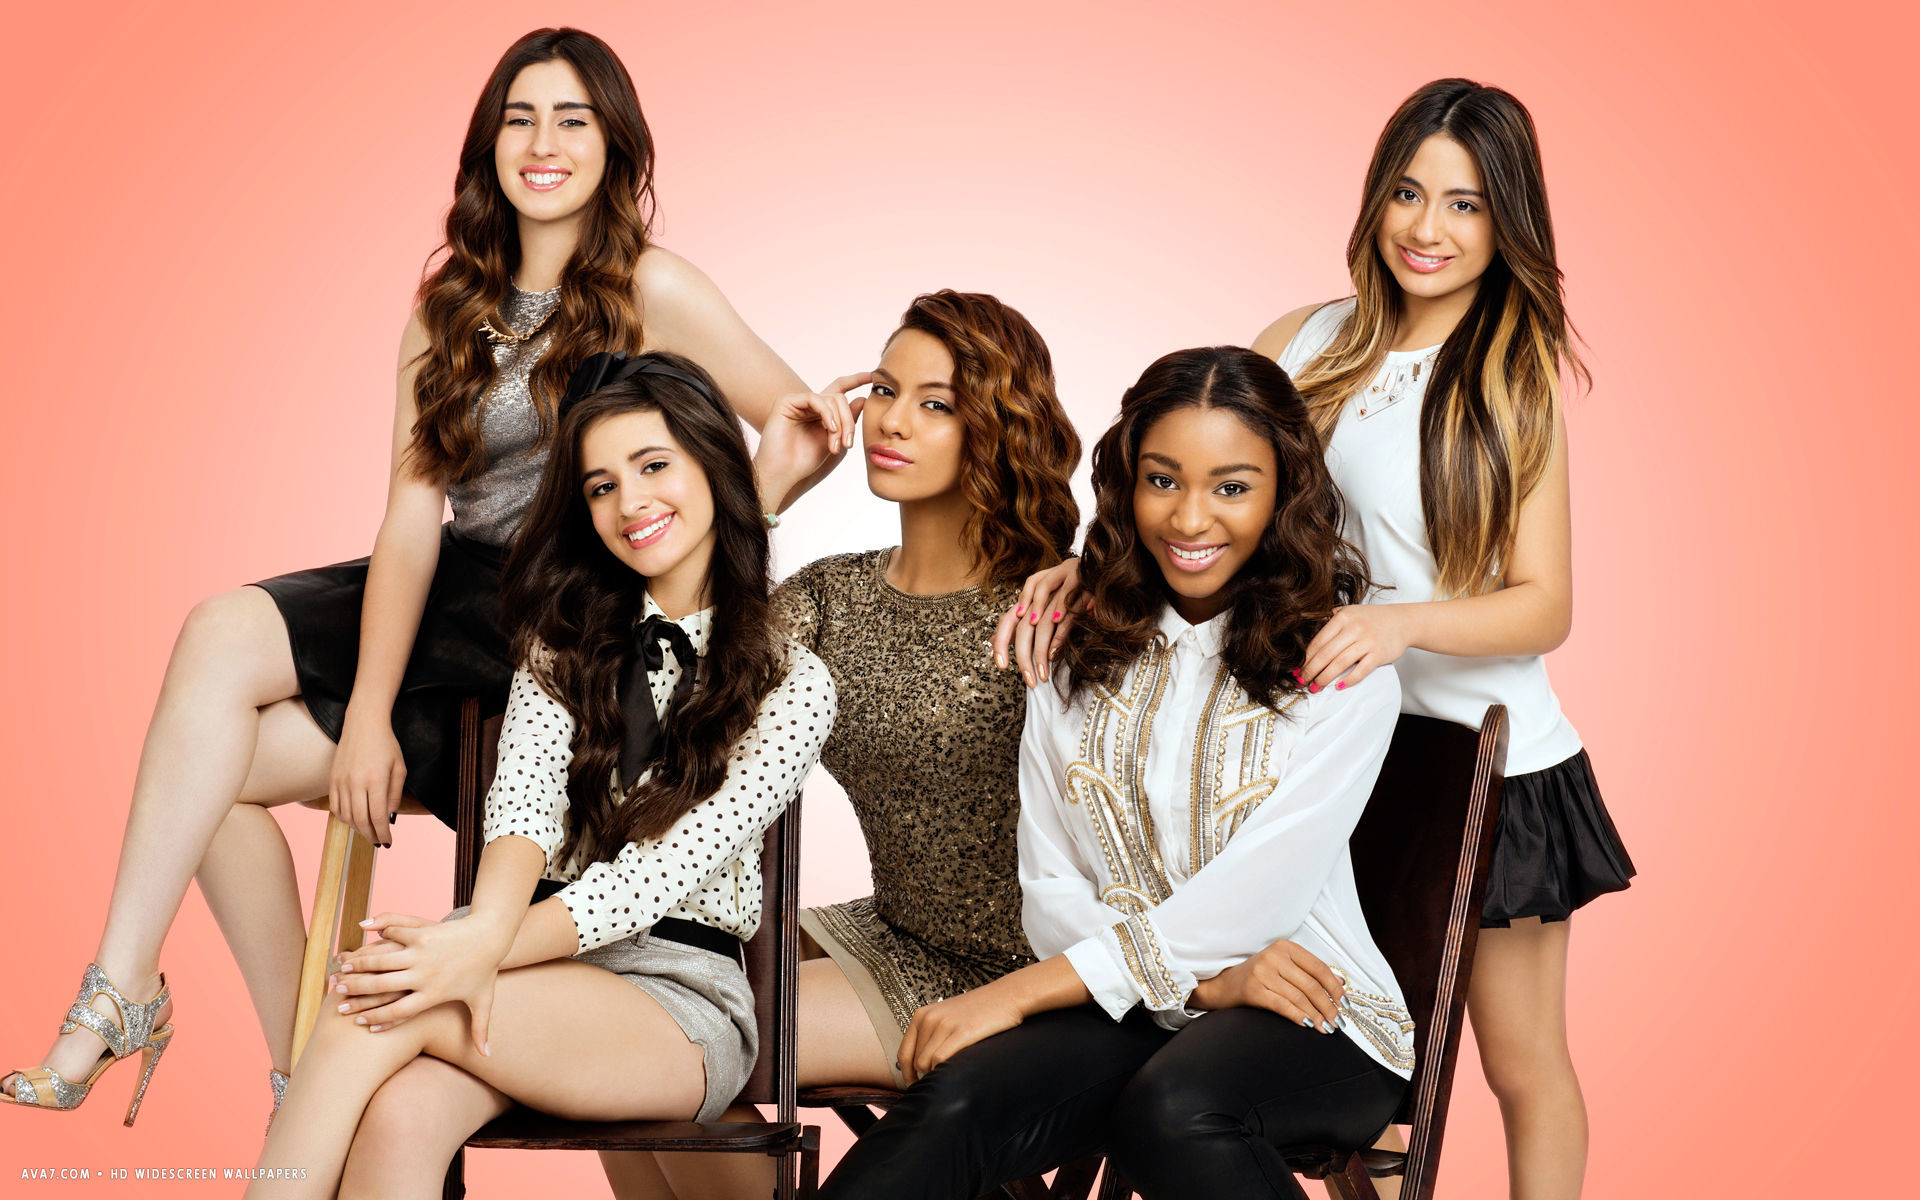 1920x1200 fifth harmony music band group hd widescreen wallpaper